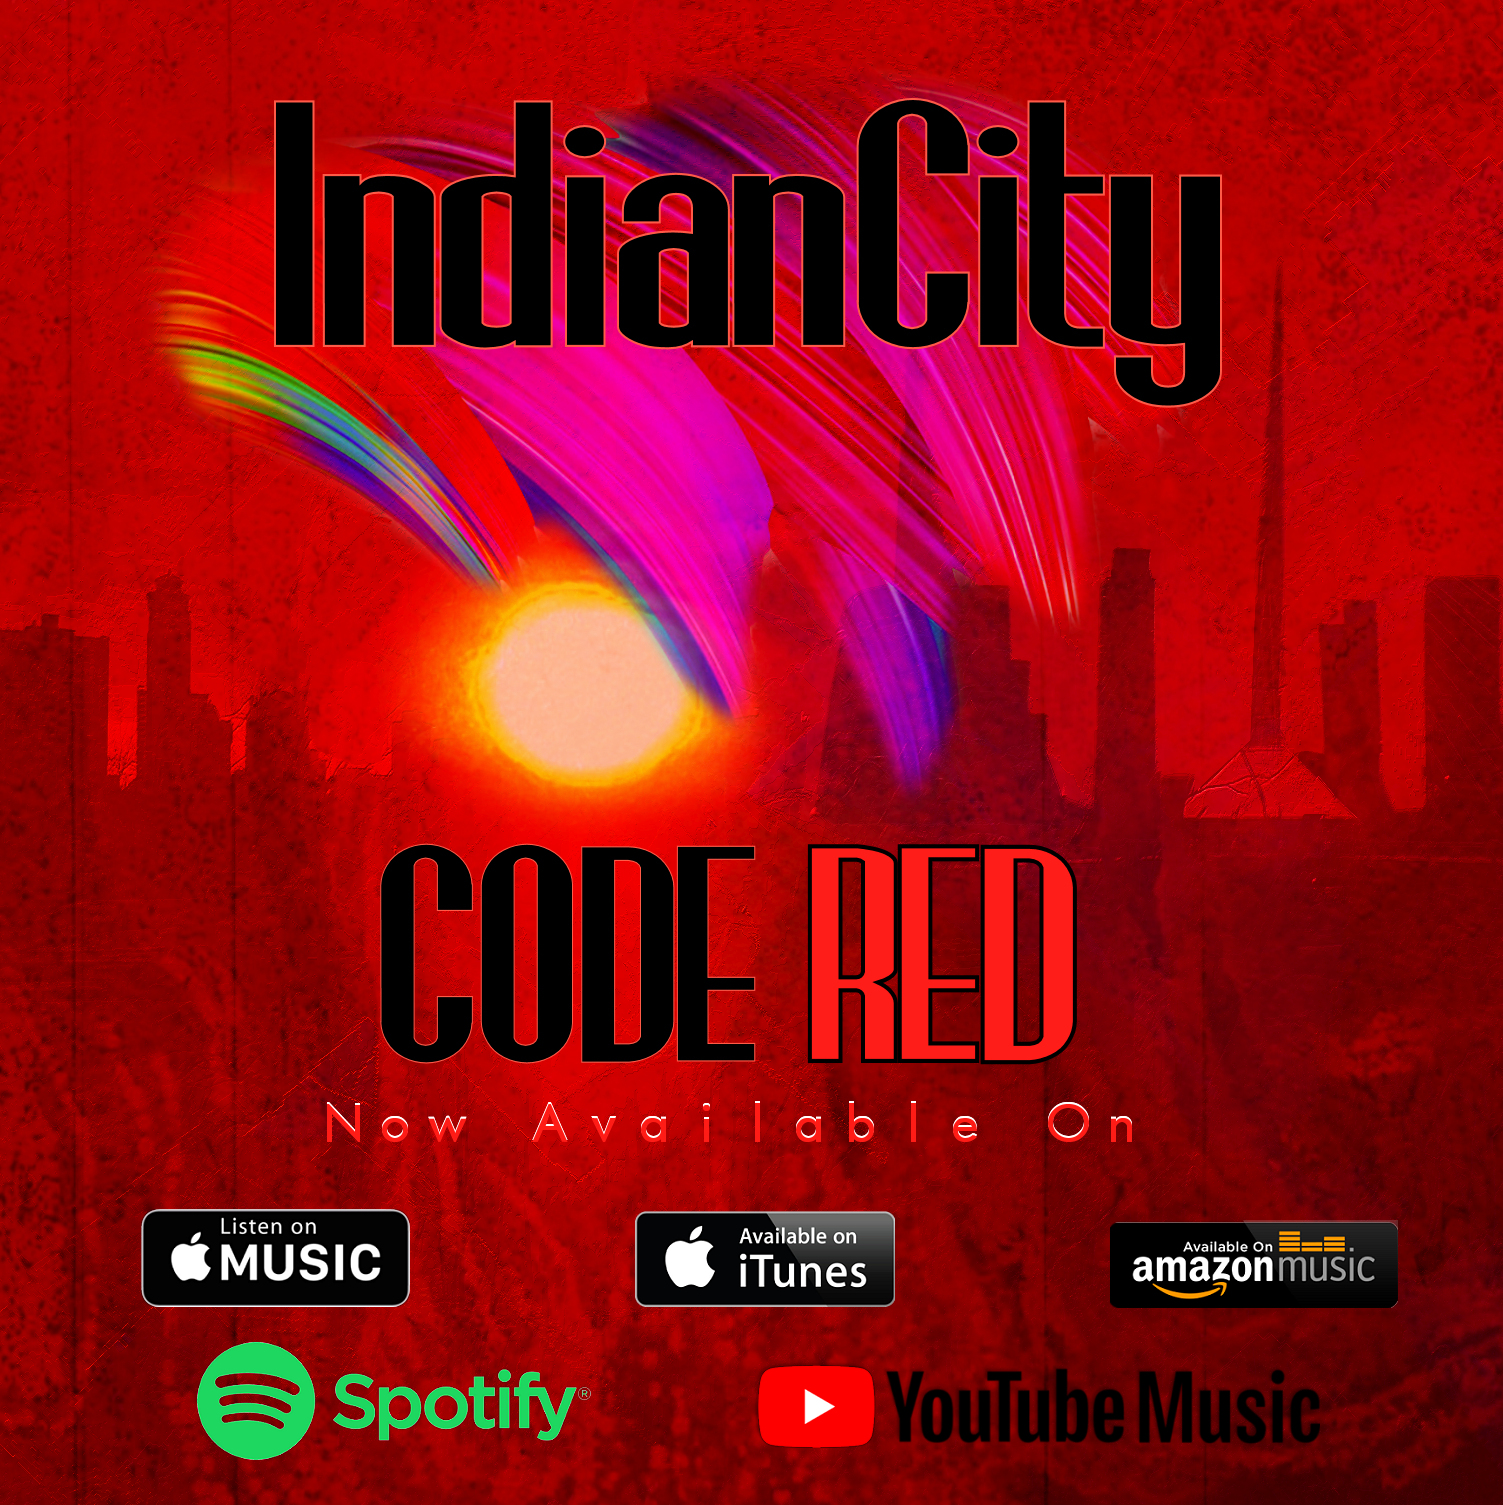 Indian City - Code Red